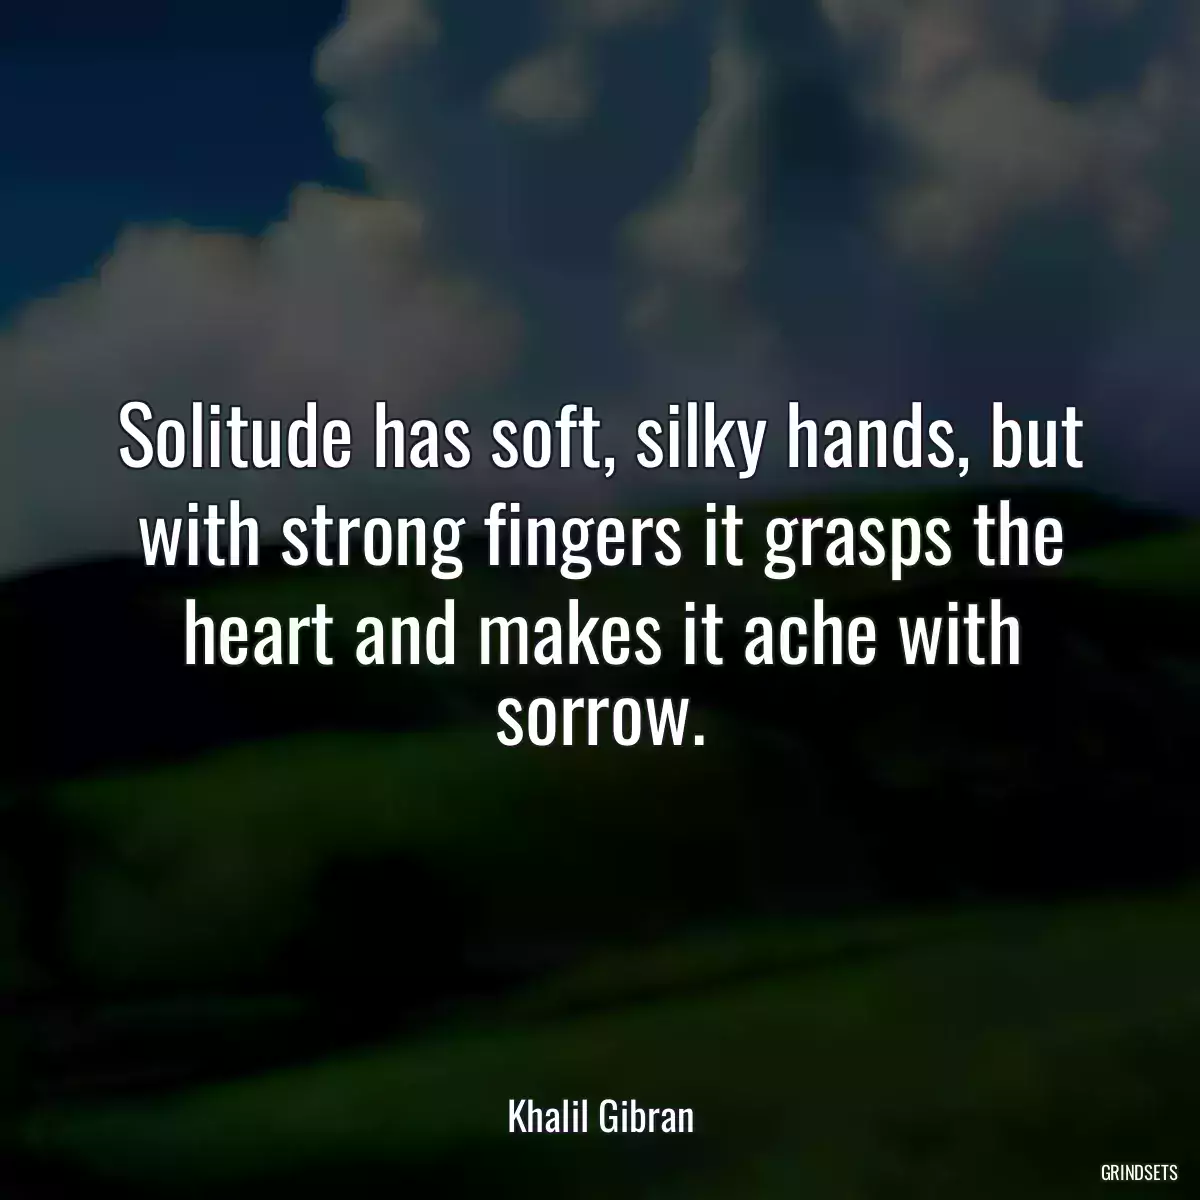 Solitude has soft, silky hands, but with strong fingers it grasps the heart and makes it ache with sorrow.